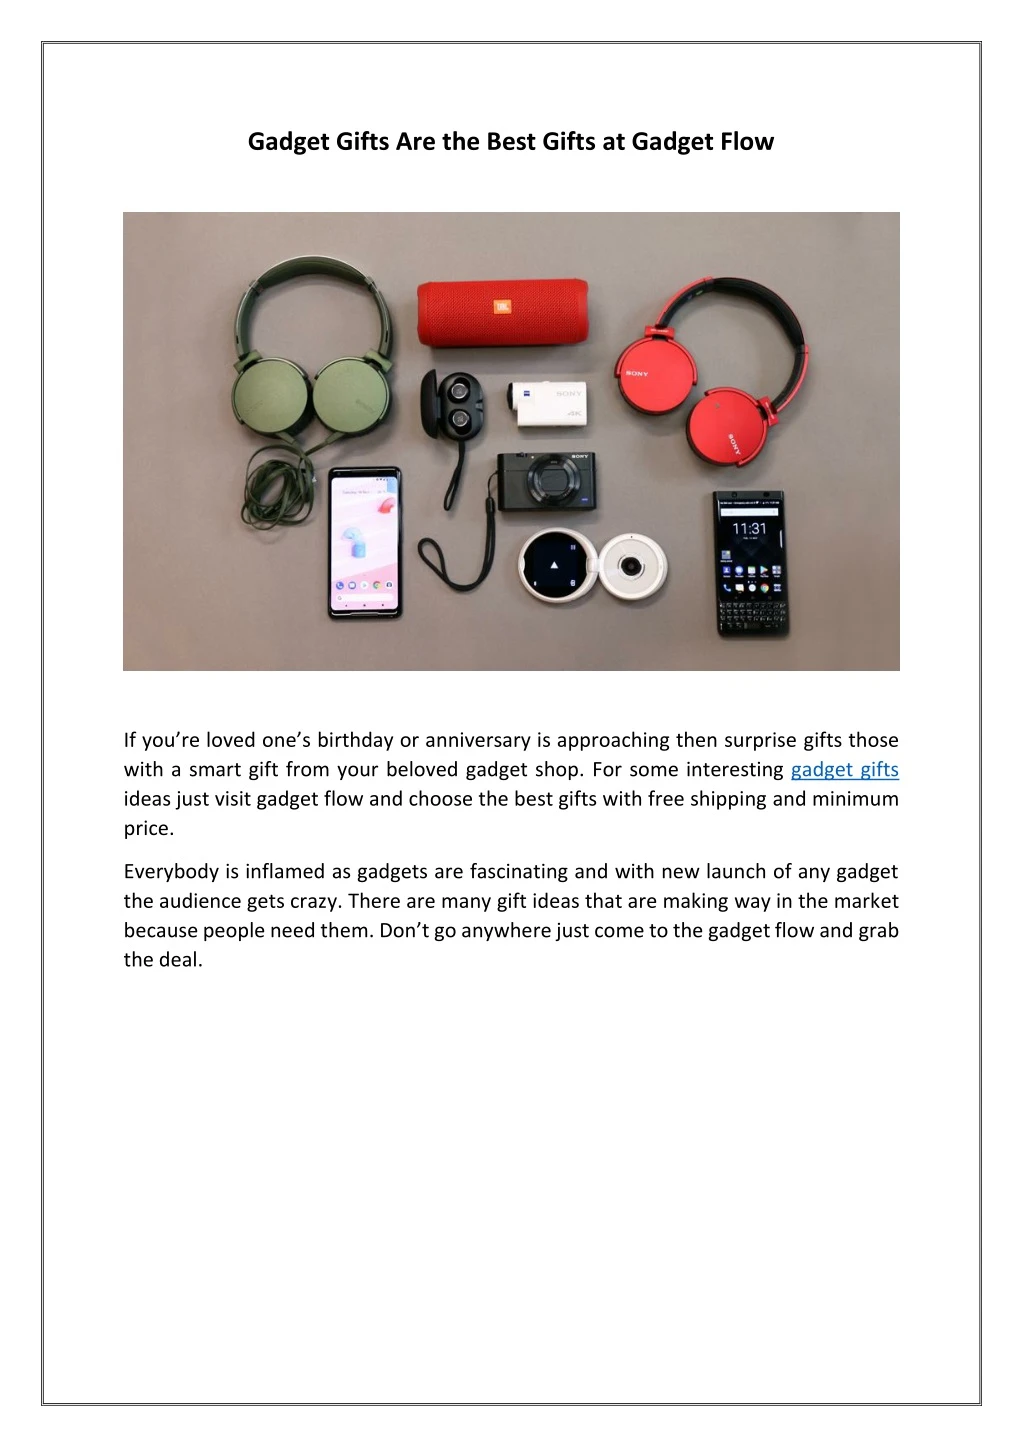 gadget gifts are the best gifts at gadget flow